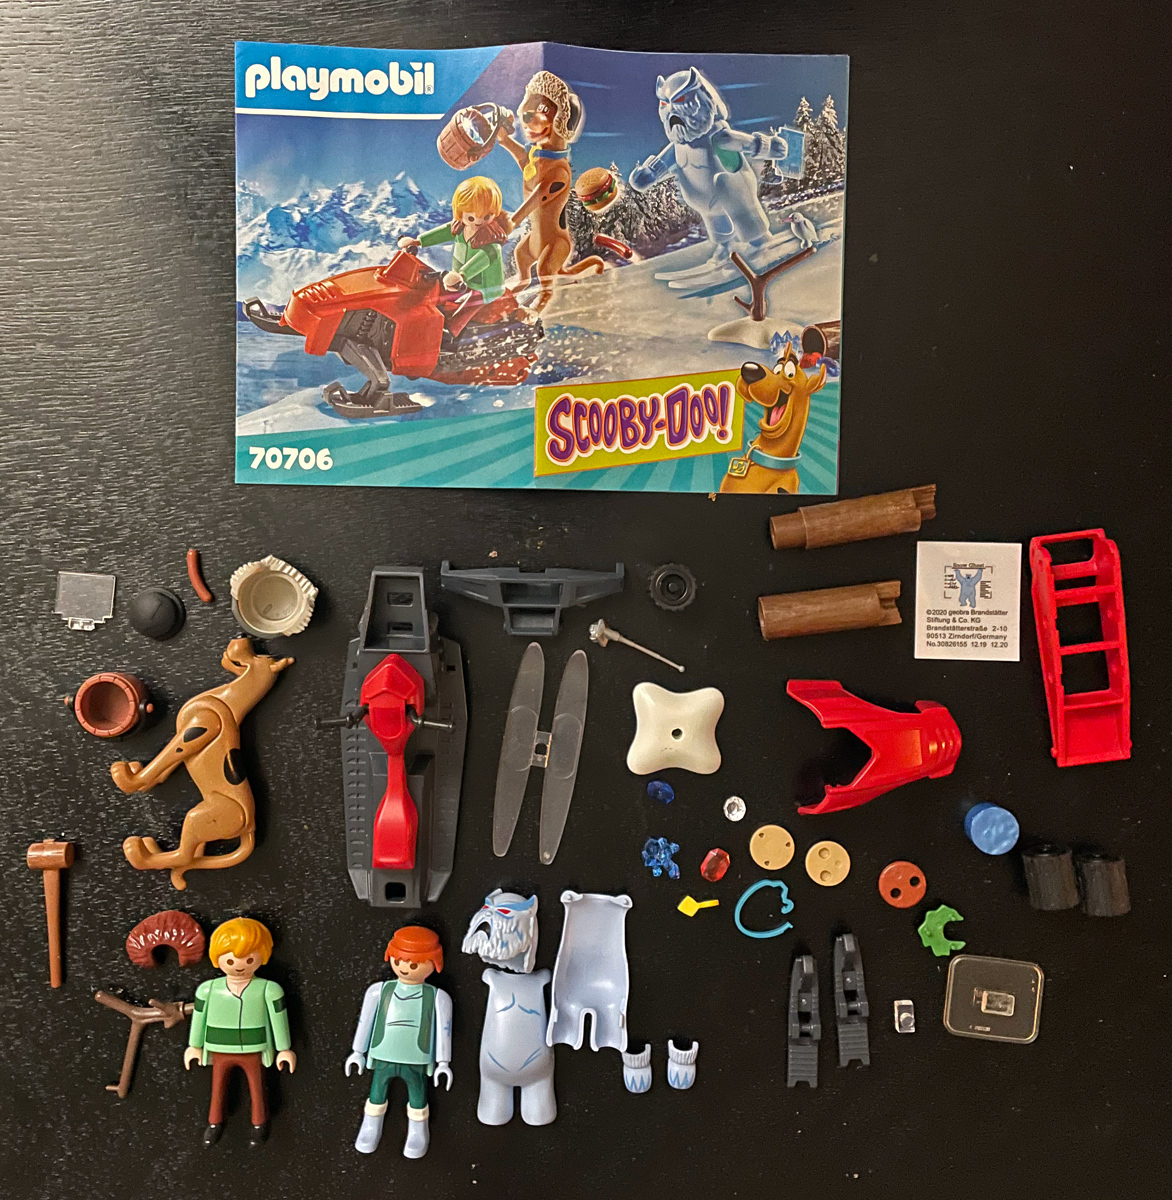 Playmobil Scooby-DOO! Adventure with Snow Ghost